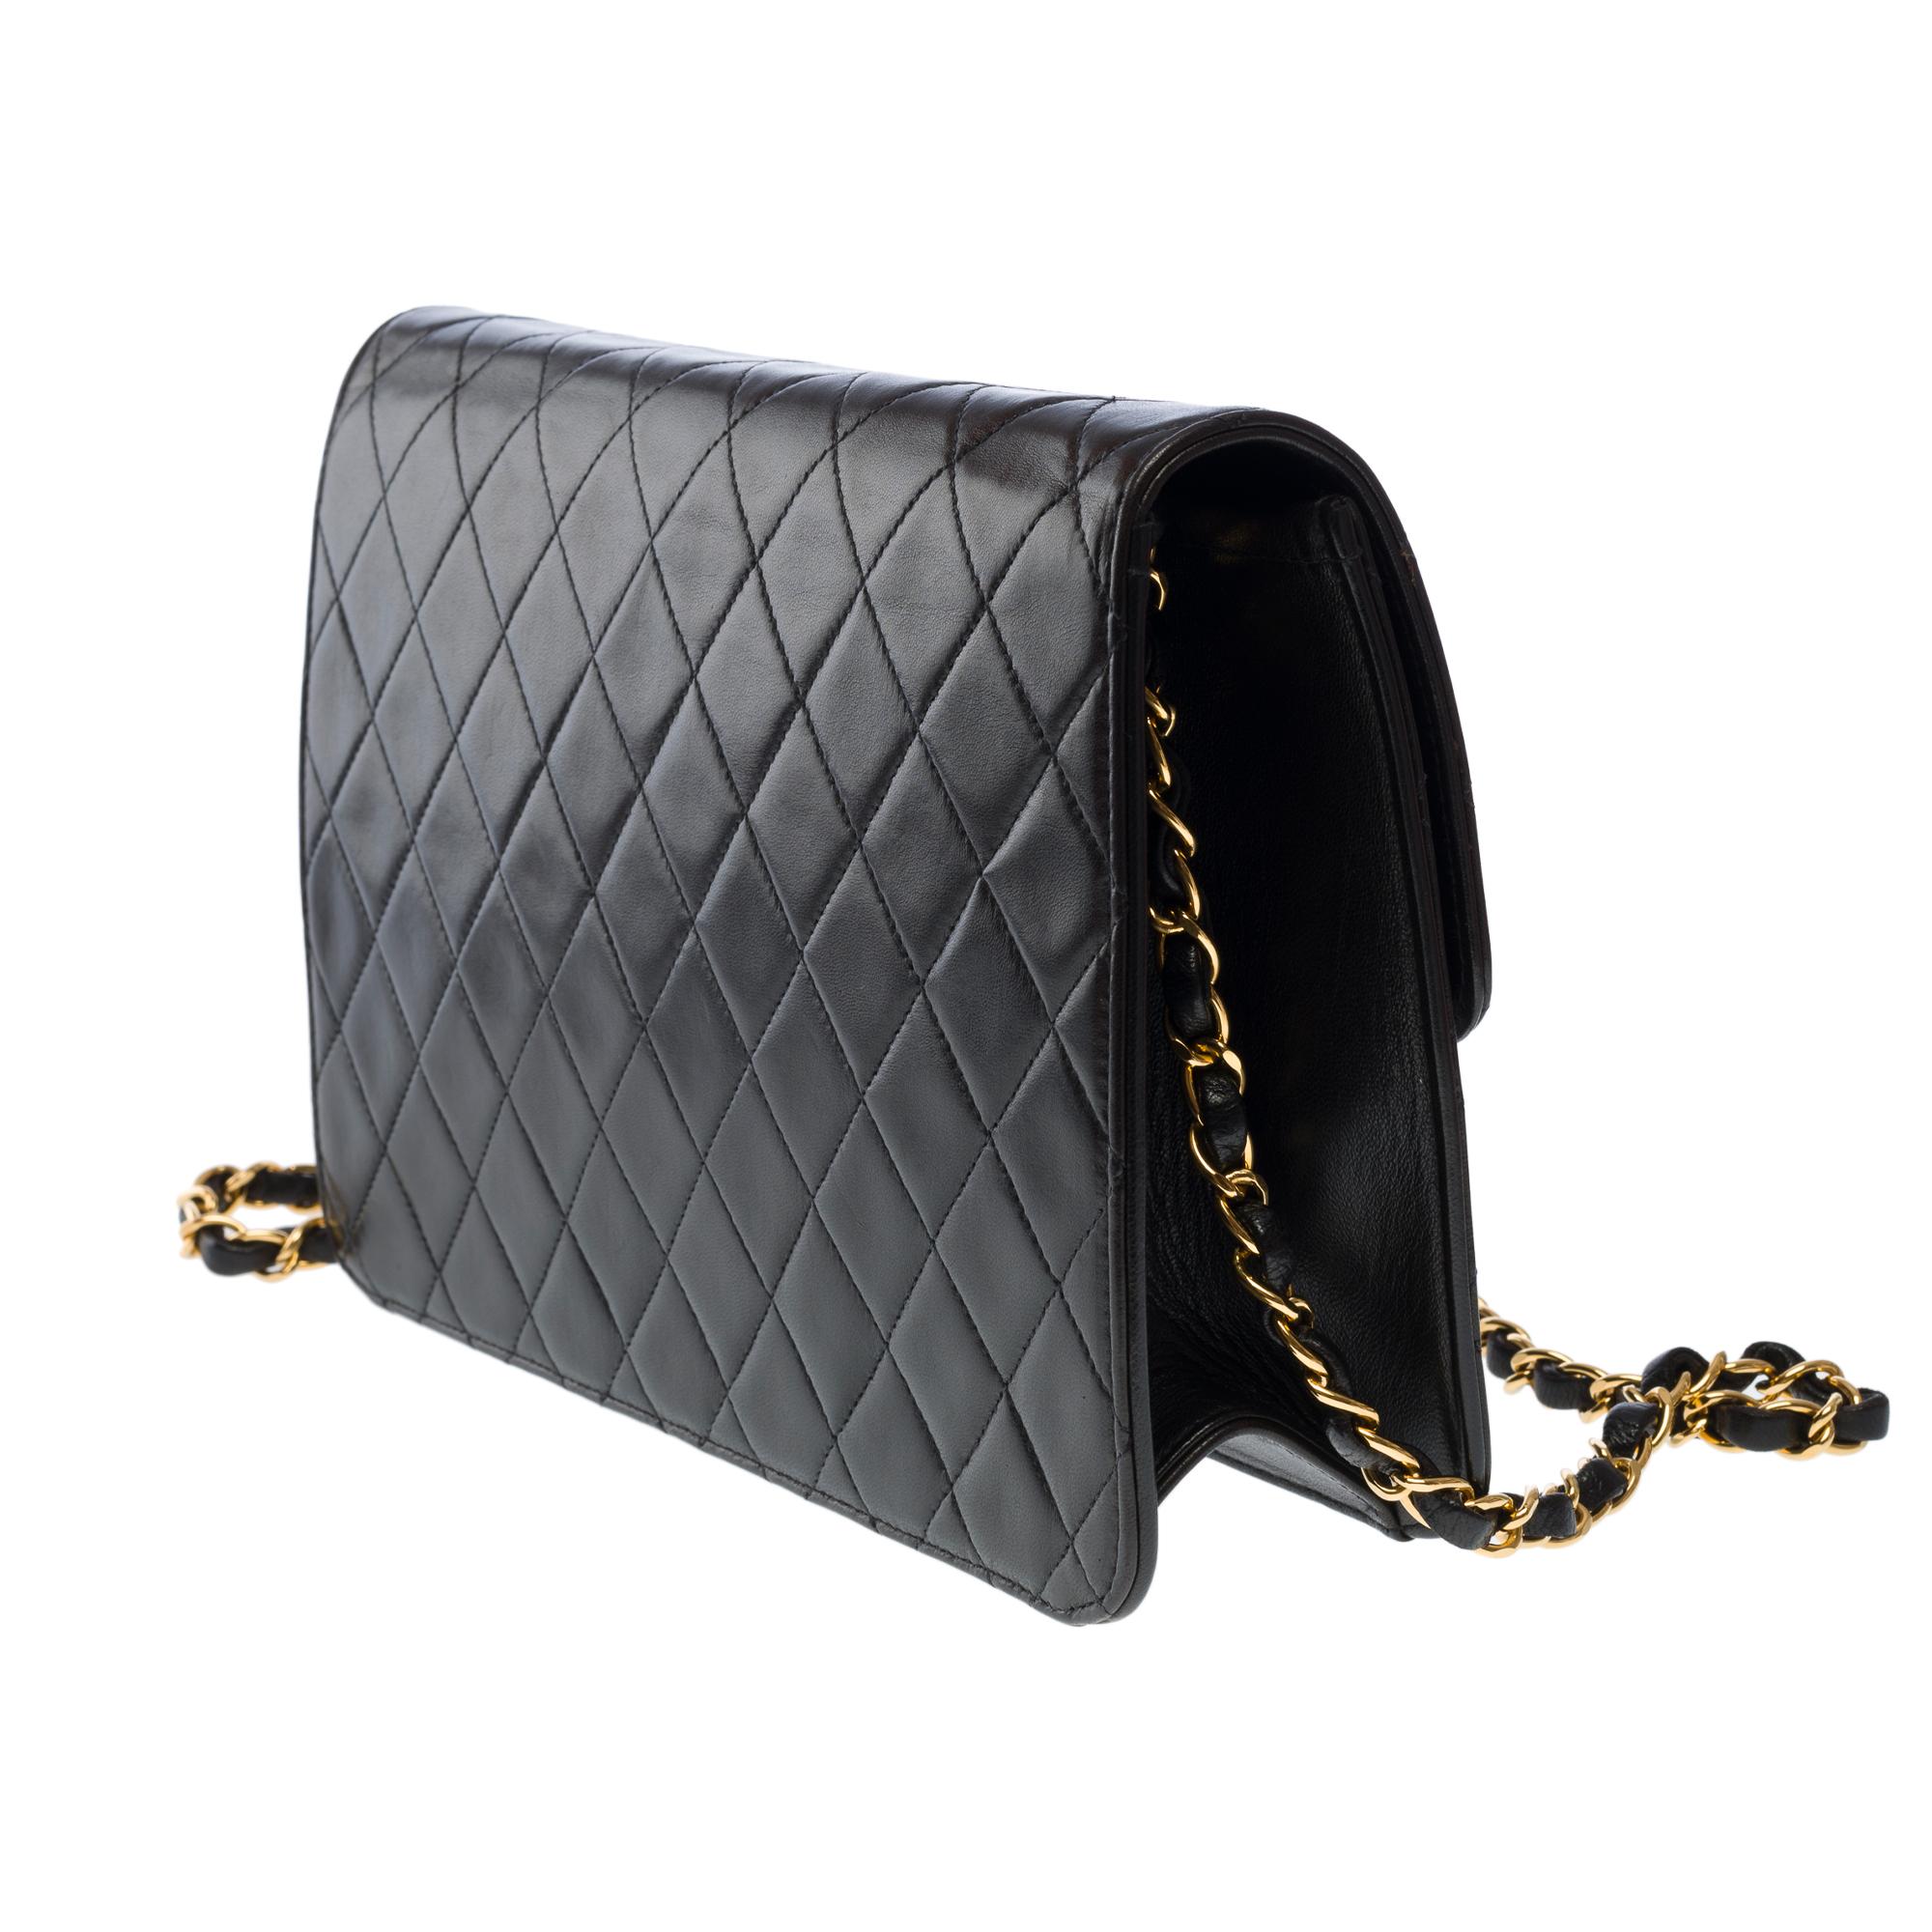 Gorgeous Chanel Classic shoulder flap bag in black quilted lambskin leather, GHW 1